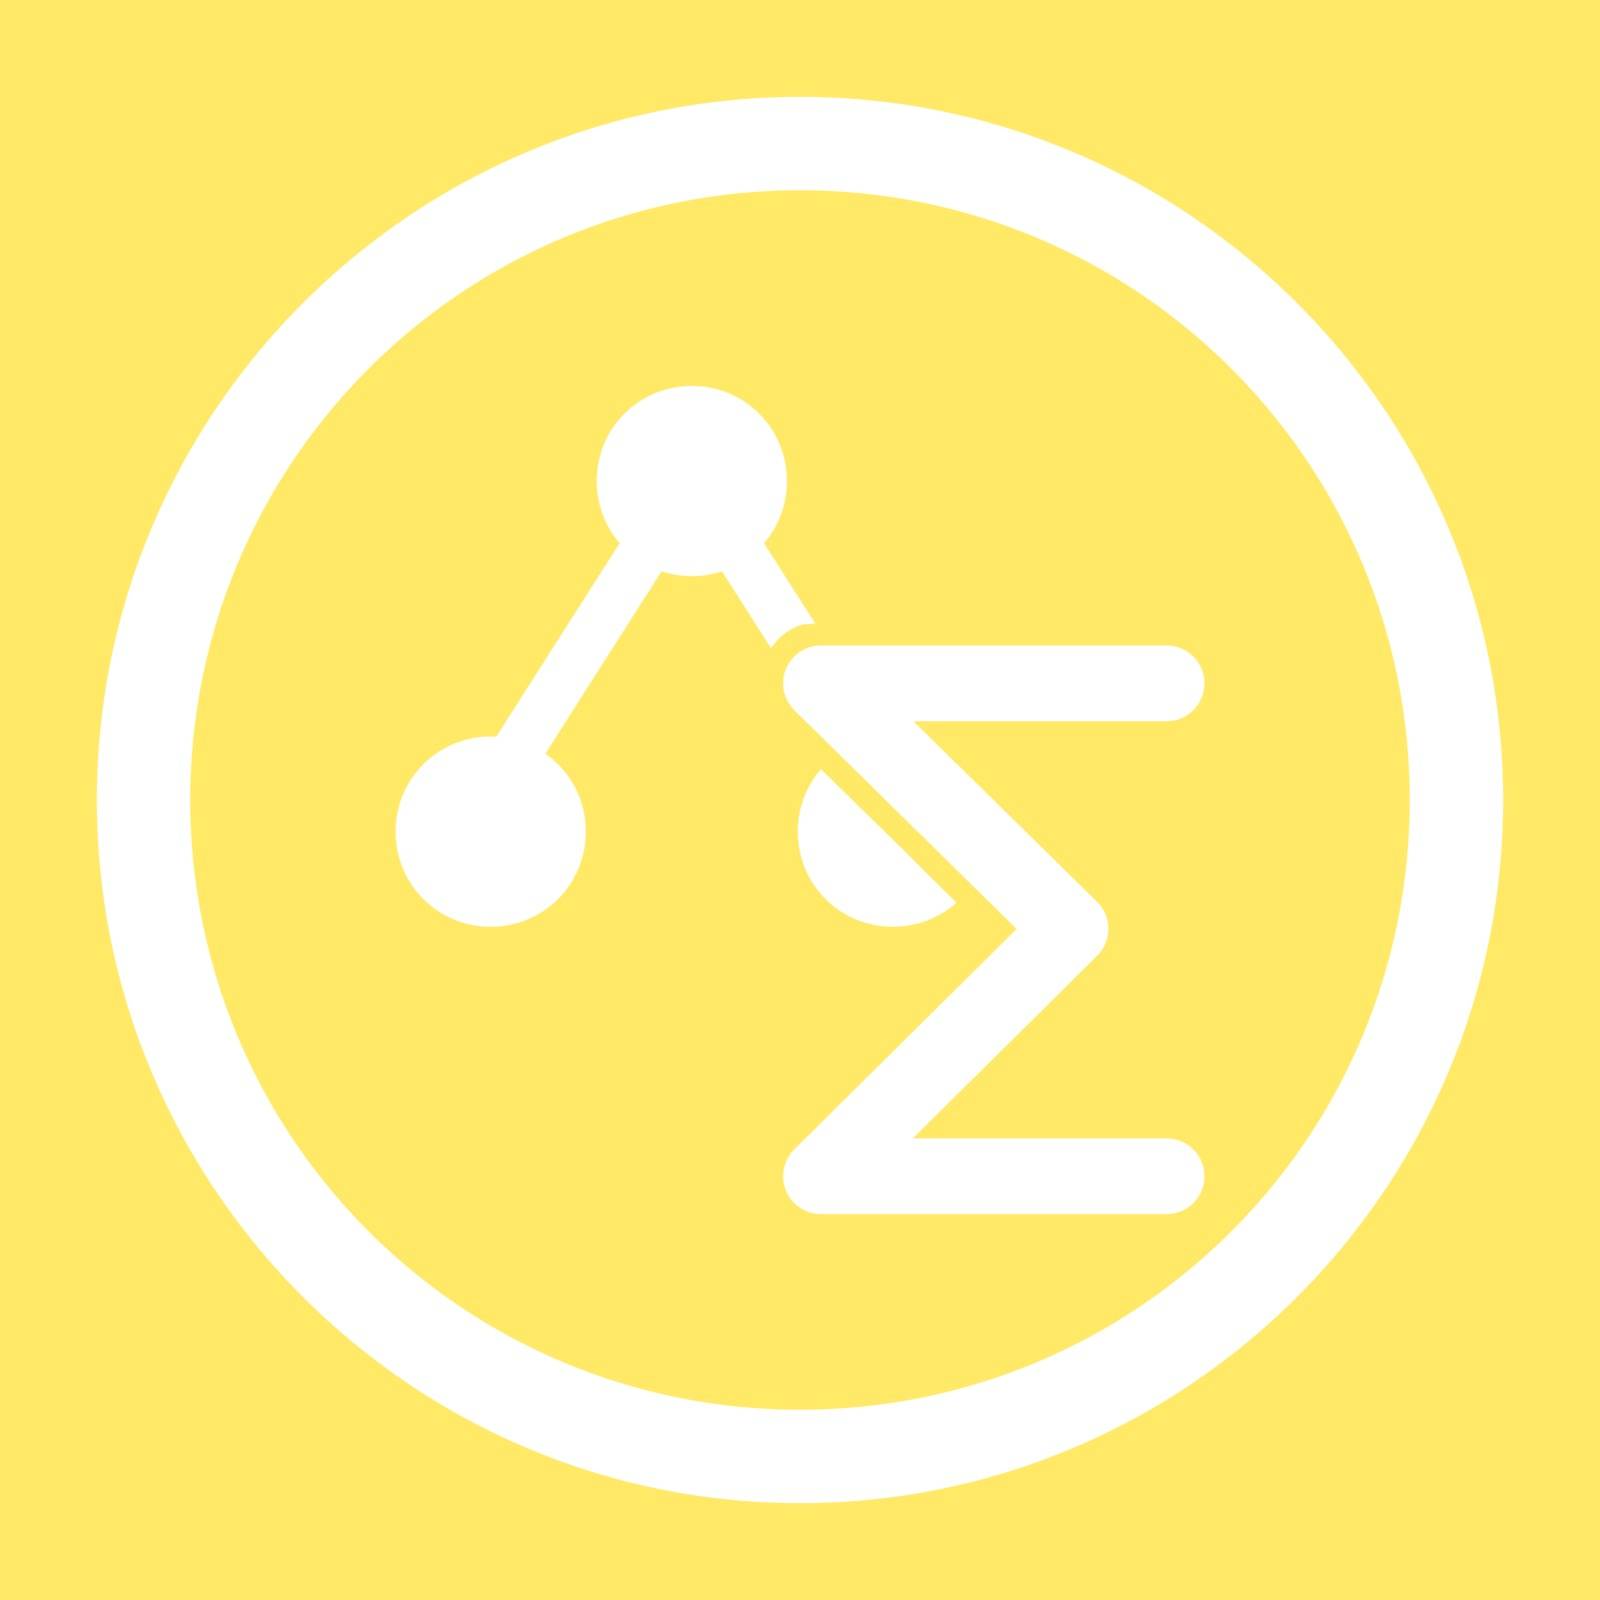 Analysis vector icon. This flat rounded symbol uses white color and isolated on a yellow background.